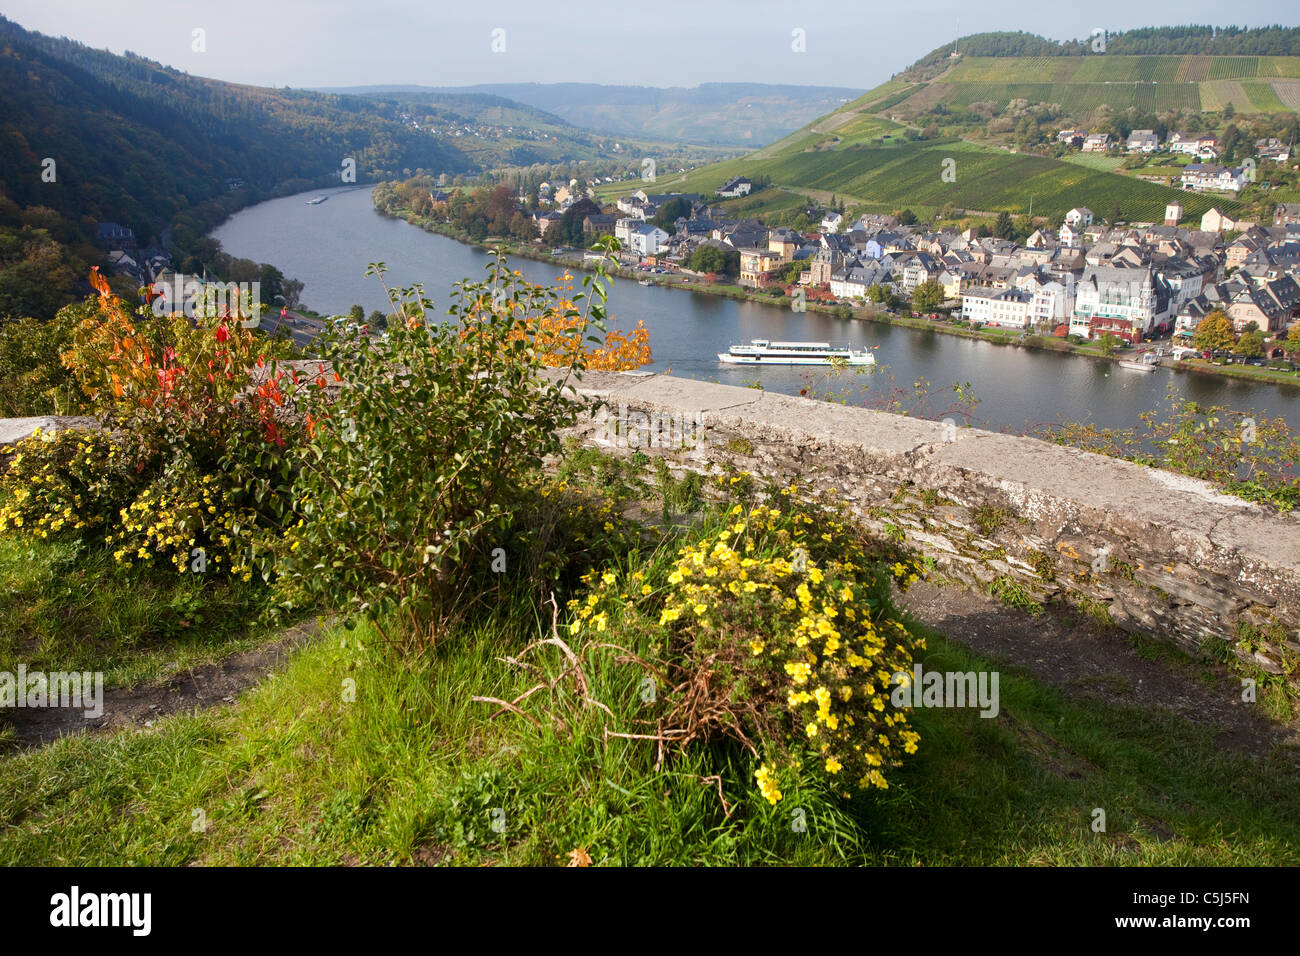 Die Mosel bei Traben-Trarbach, Herbst, Moselle à l'automne, Traben-Trabach Banque D'Images